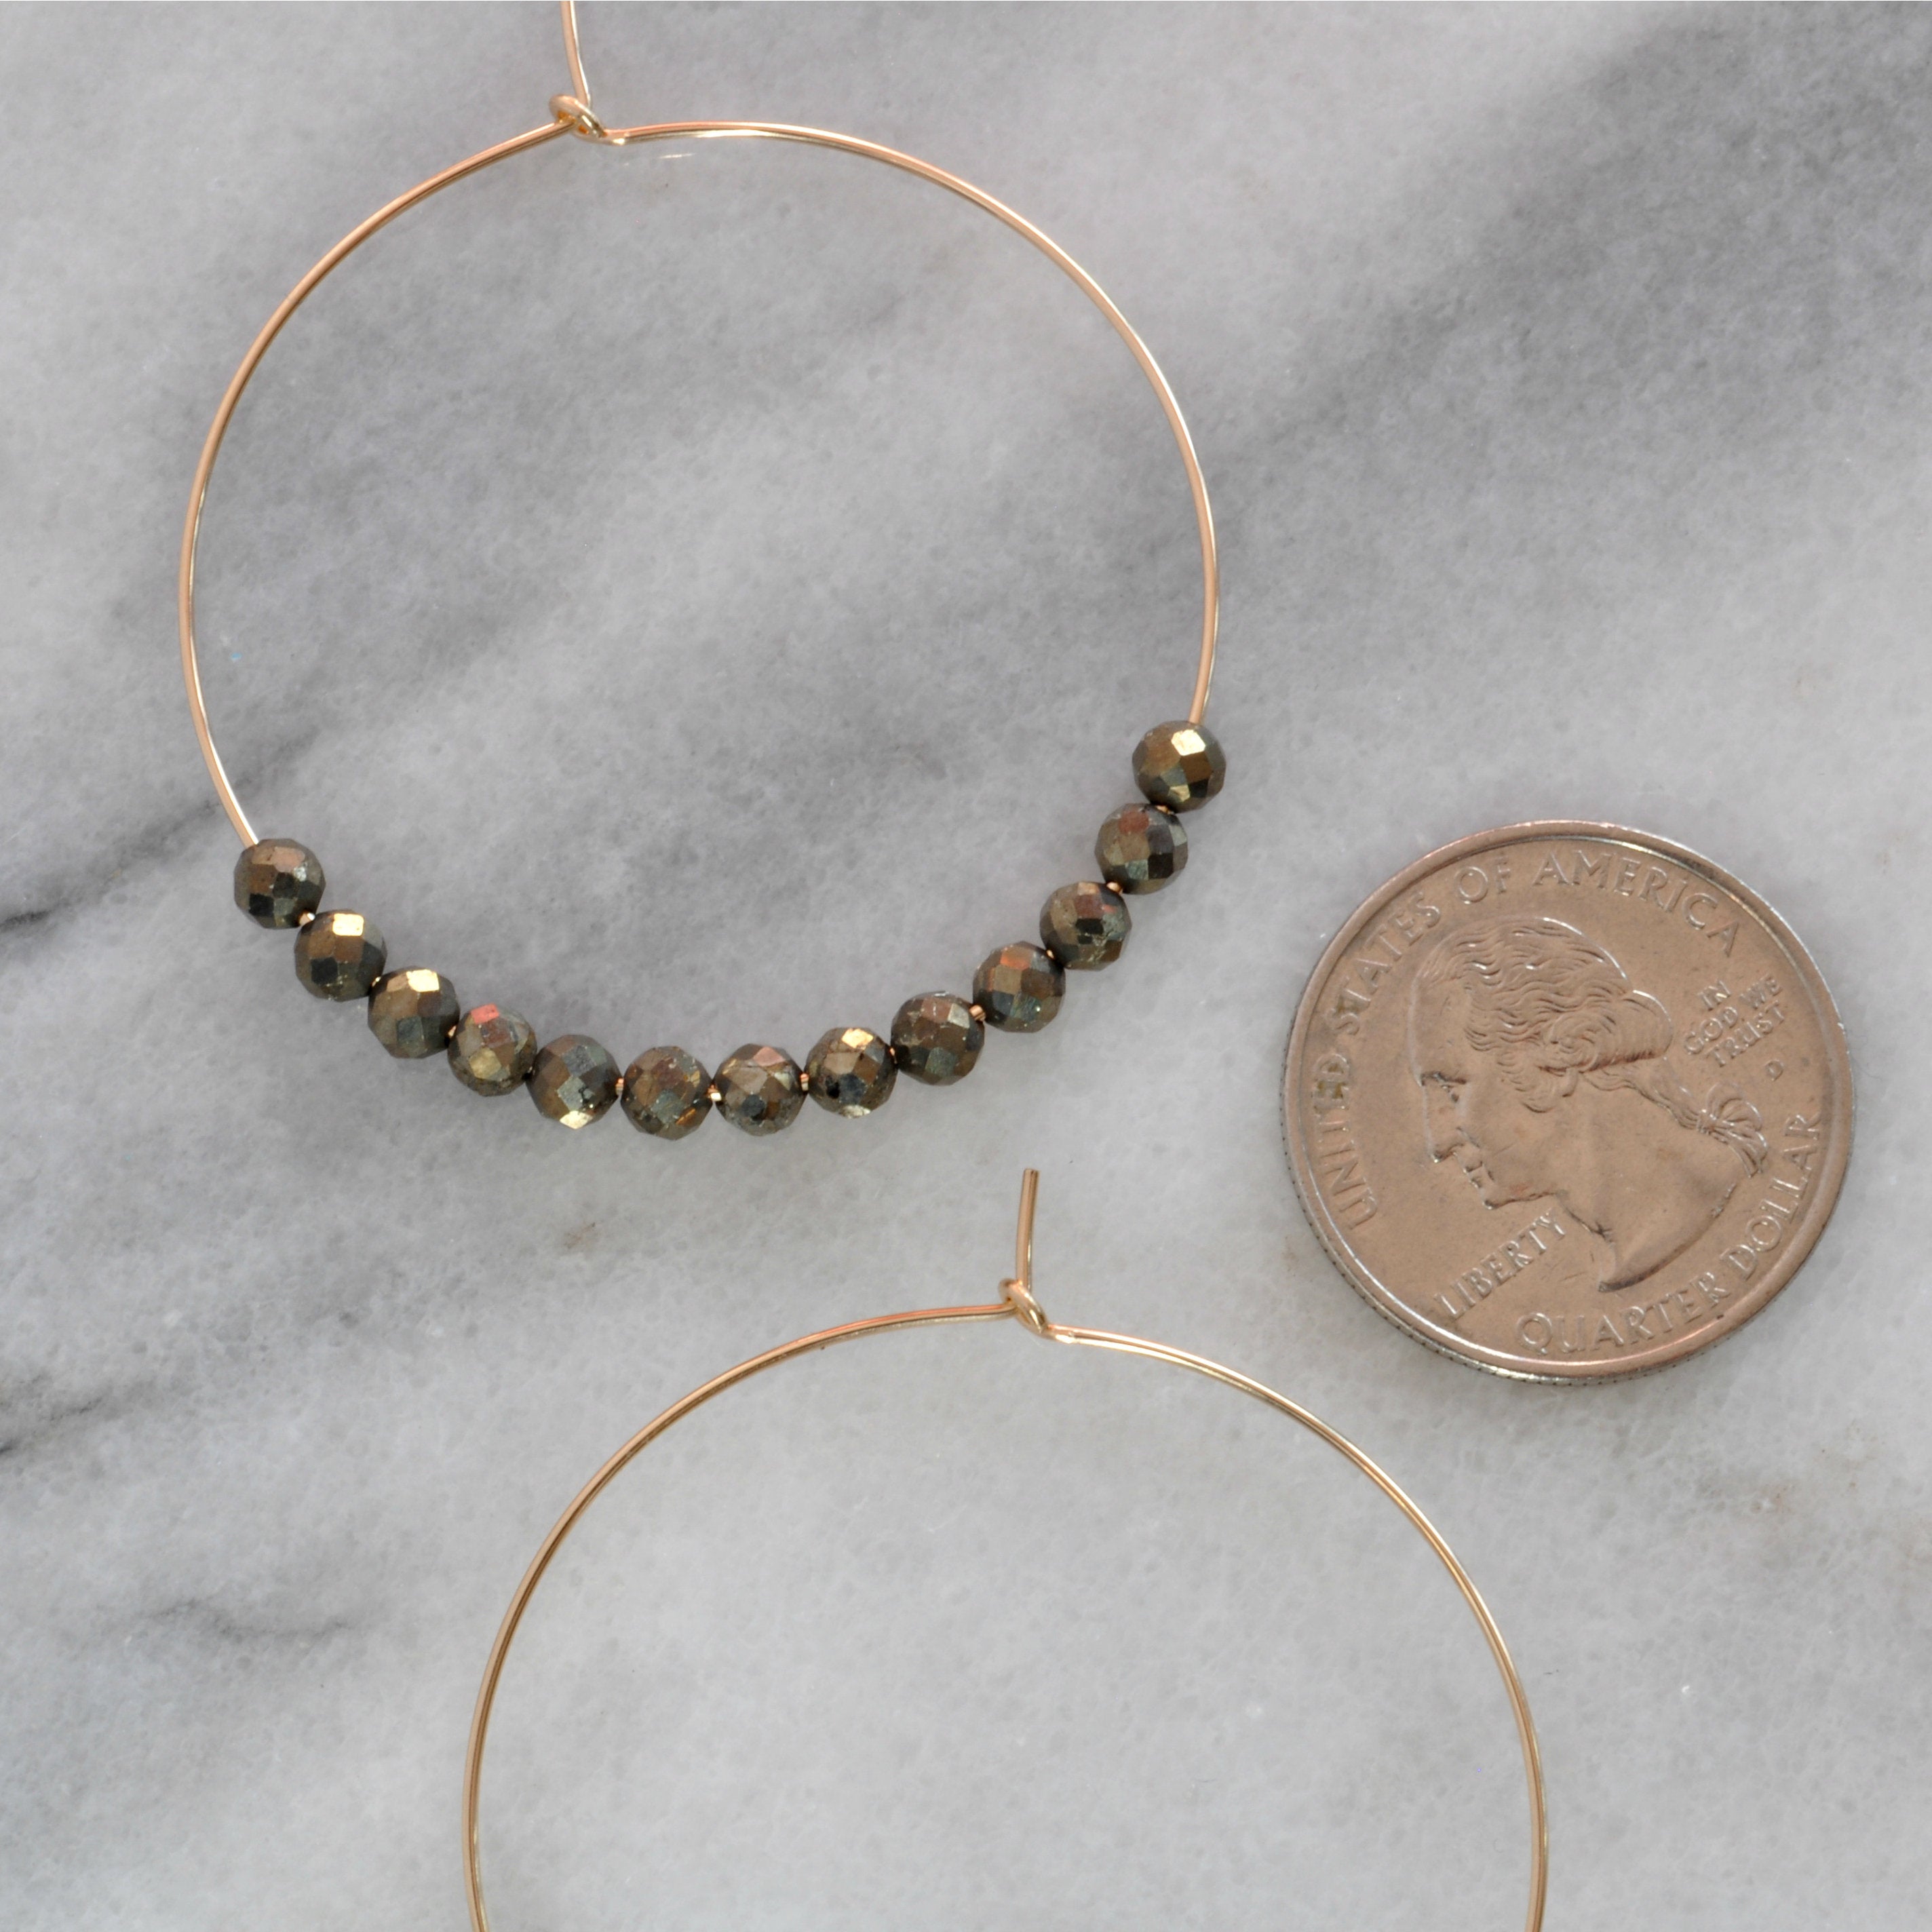 Libby & Smee Pyrite Beaded Earrings, still life with quarter for scale